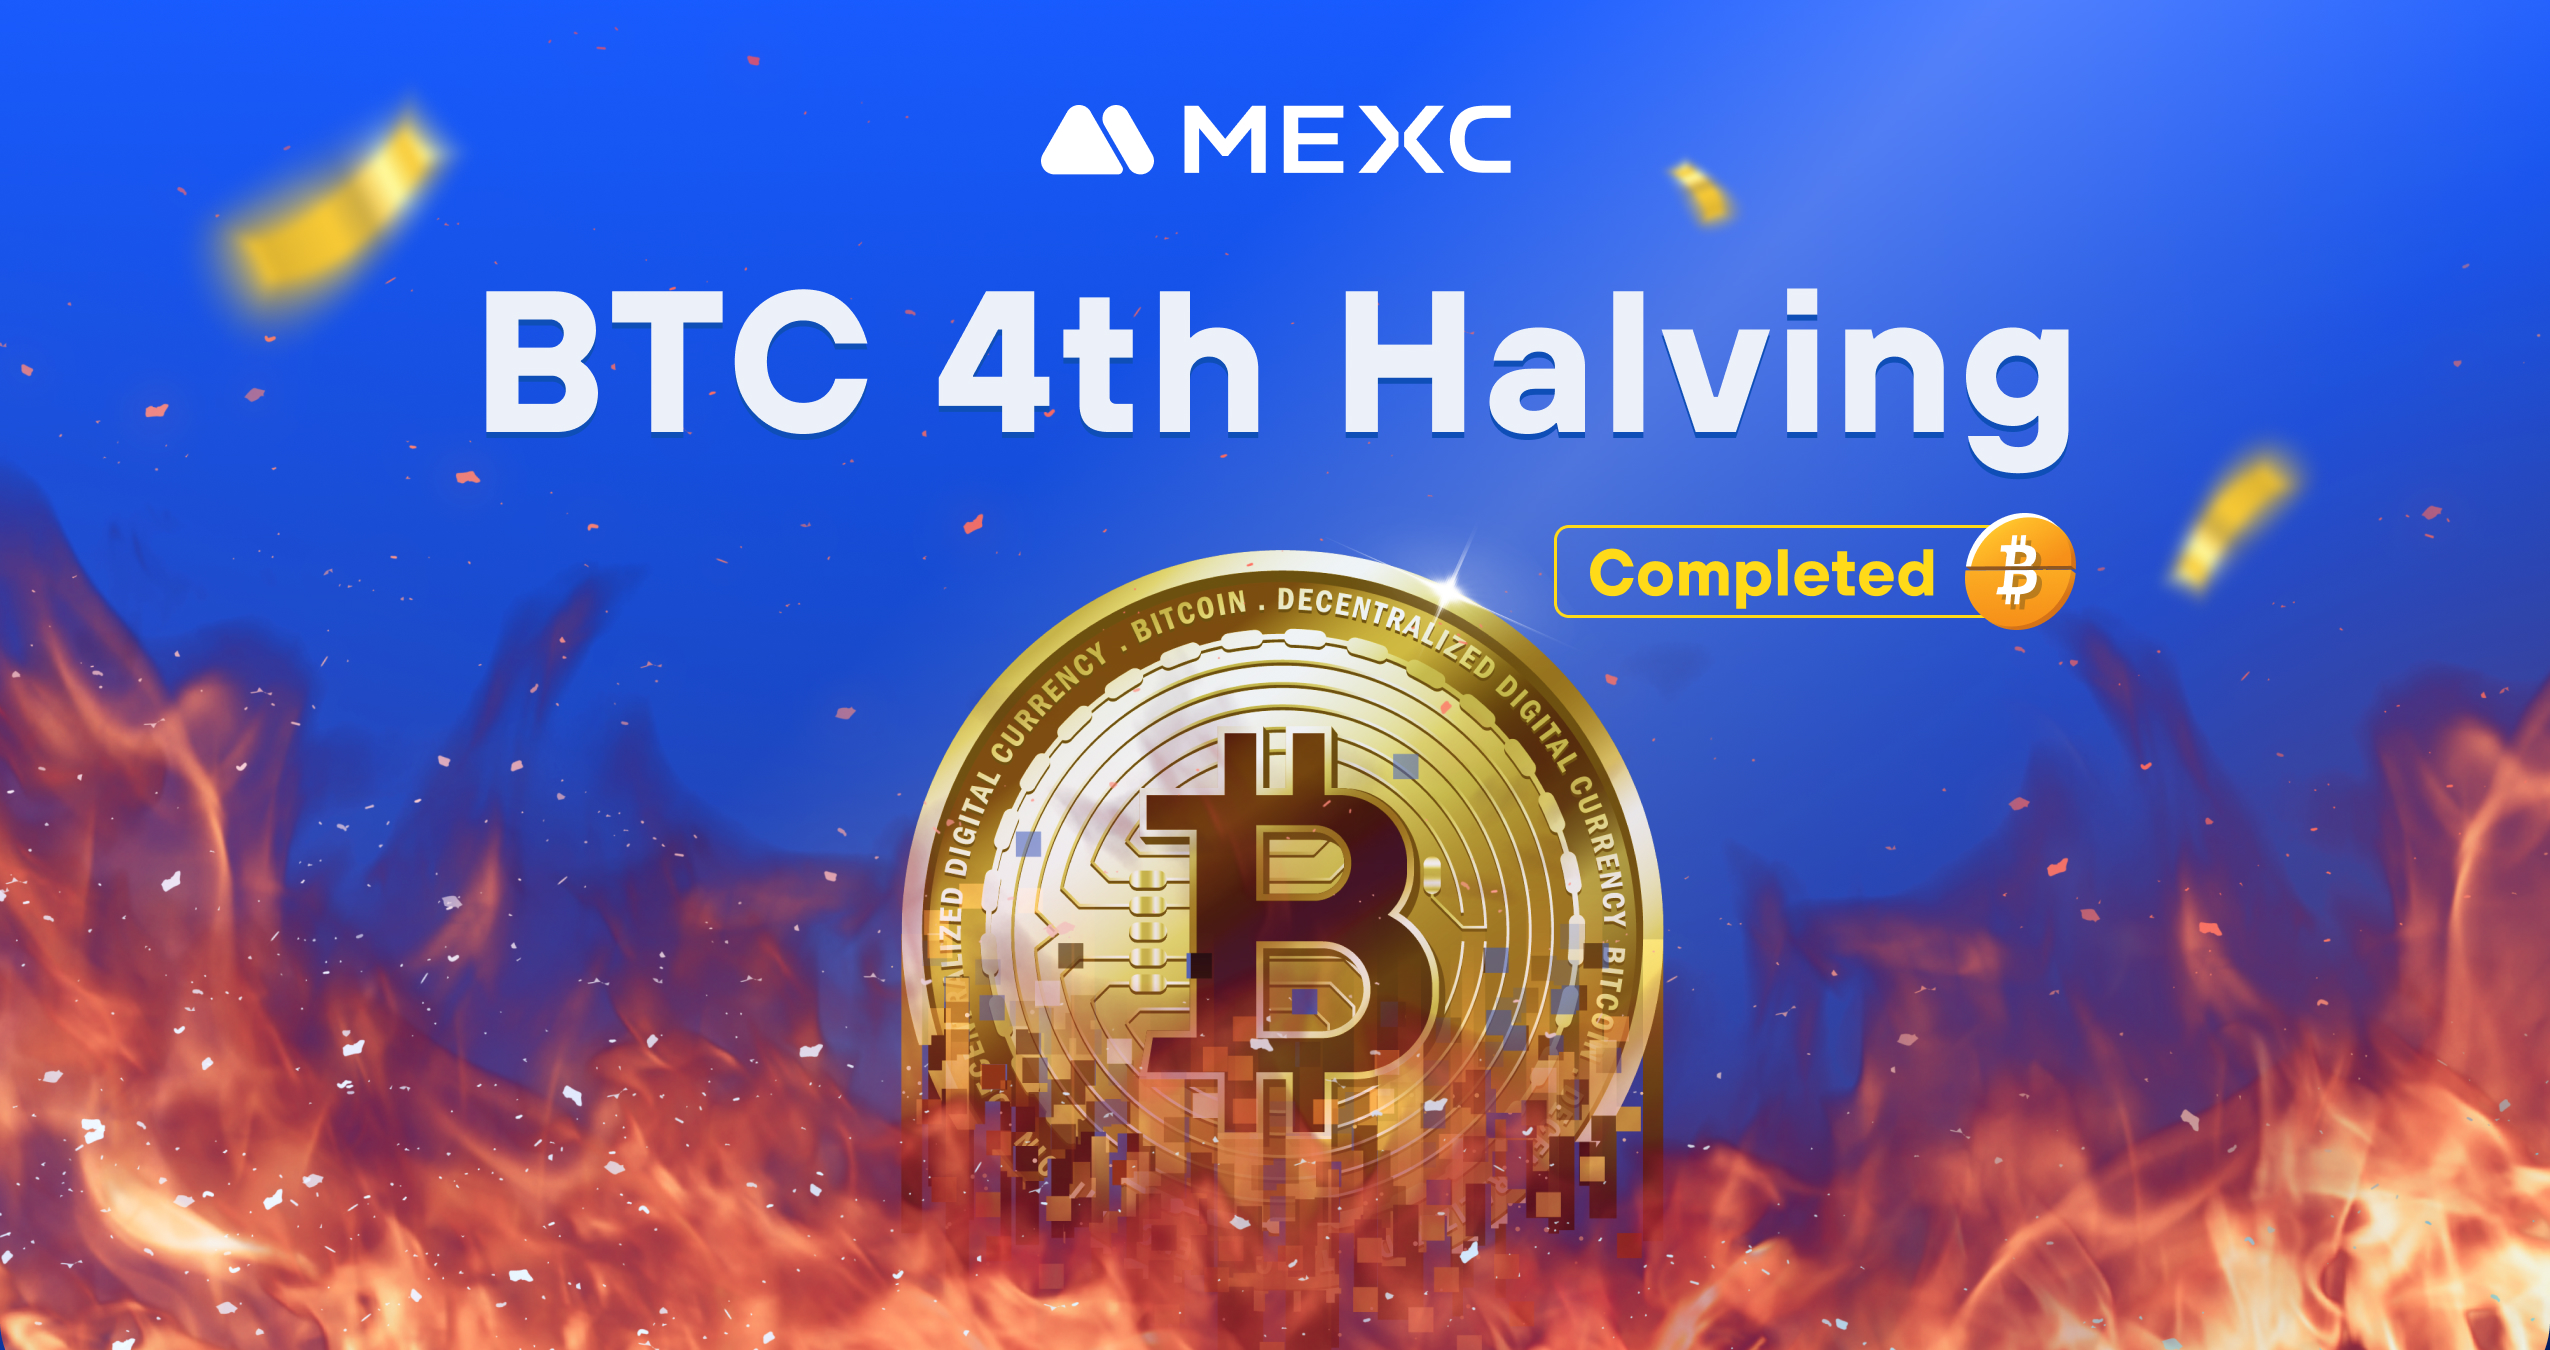 What Should You Do At MEXC After Bitcoin Halving?